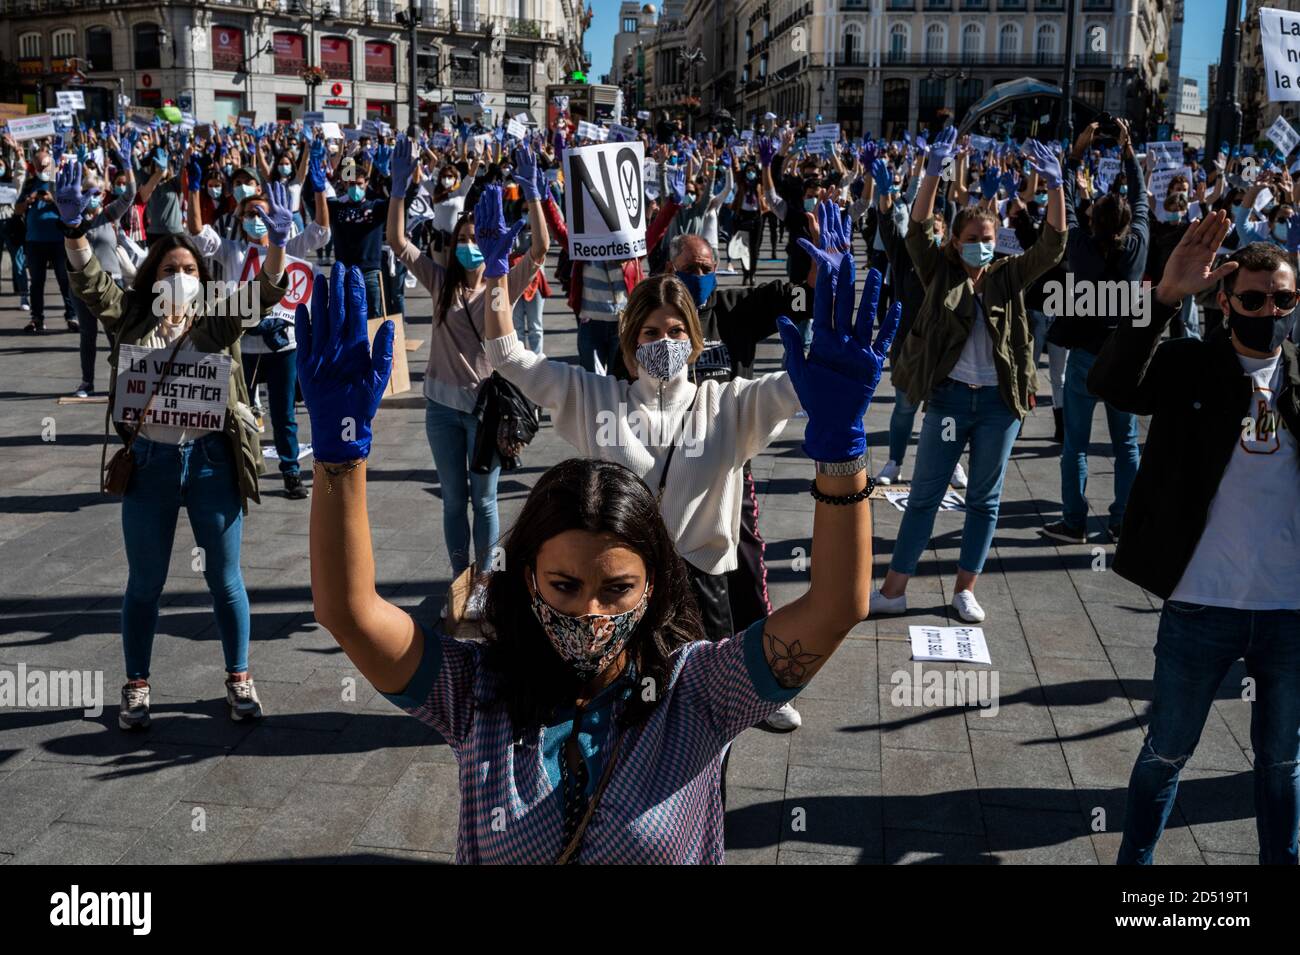 Madrid, Spain. 12th Oct, 2020. Nurses raising hands wearing protective gloves during a protest in Sol Square demanding better working conditions and protesting against the management of the coronavirus crisis in the public health care system. Credit: Marcos del Mazo/Alamy Live News Stock Photo